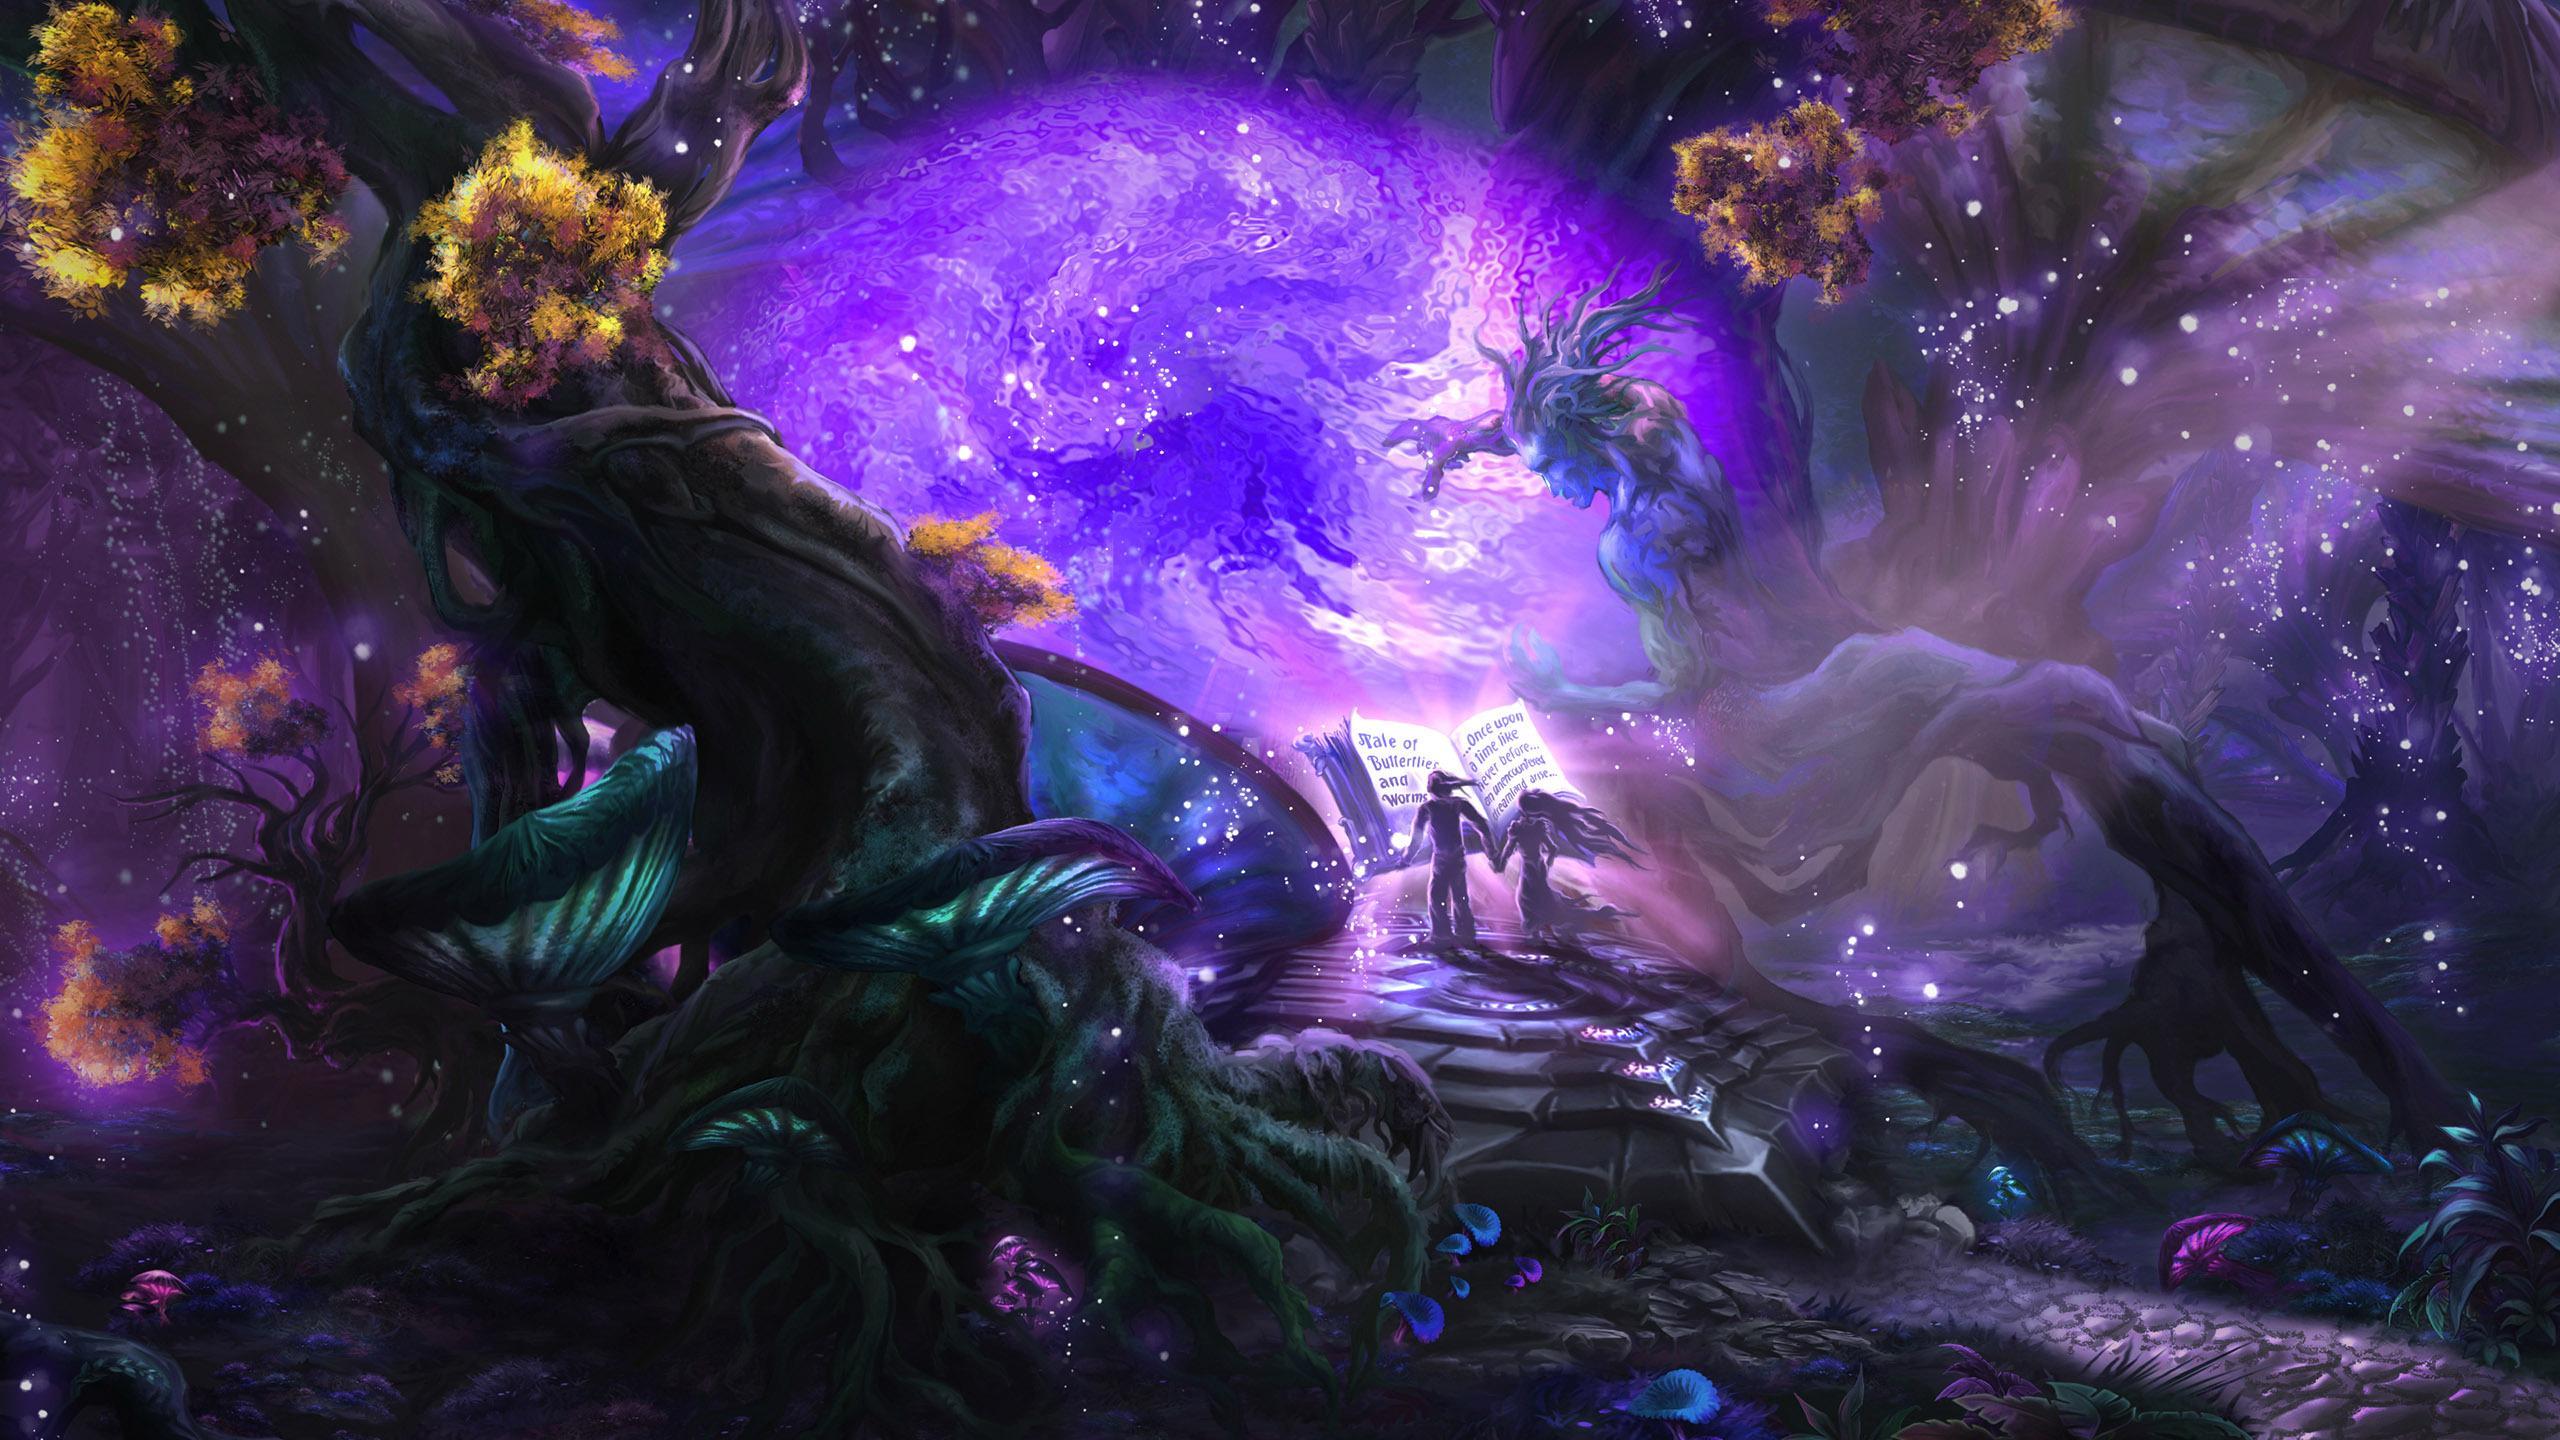 Reading the book in the magic forest HD desktop wallpaper